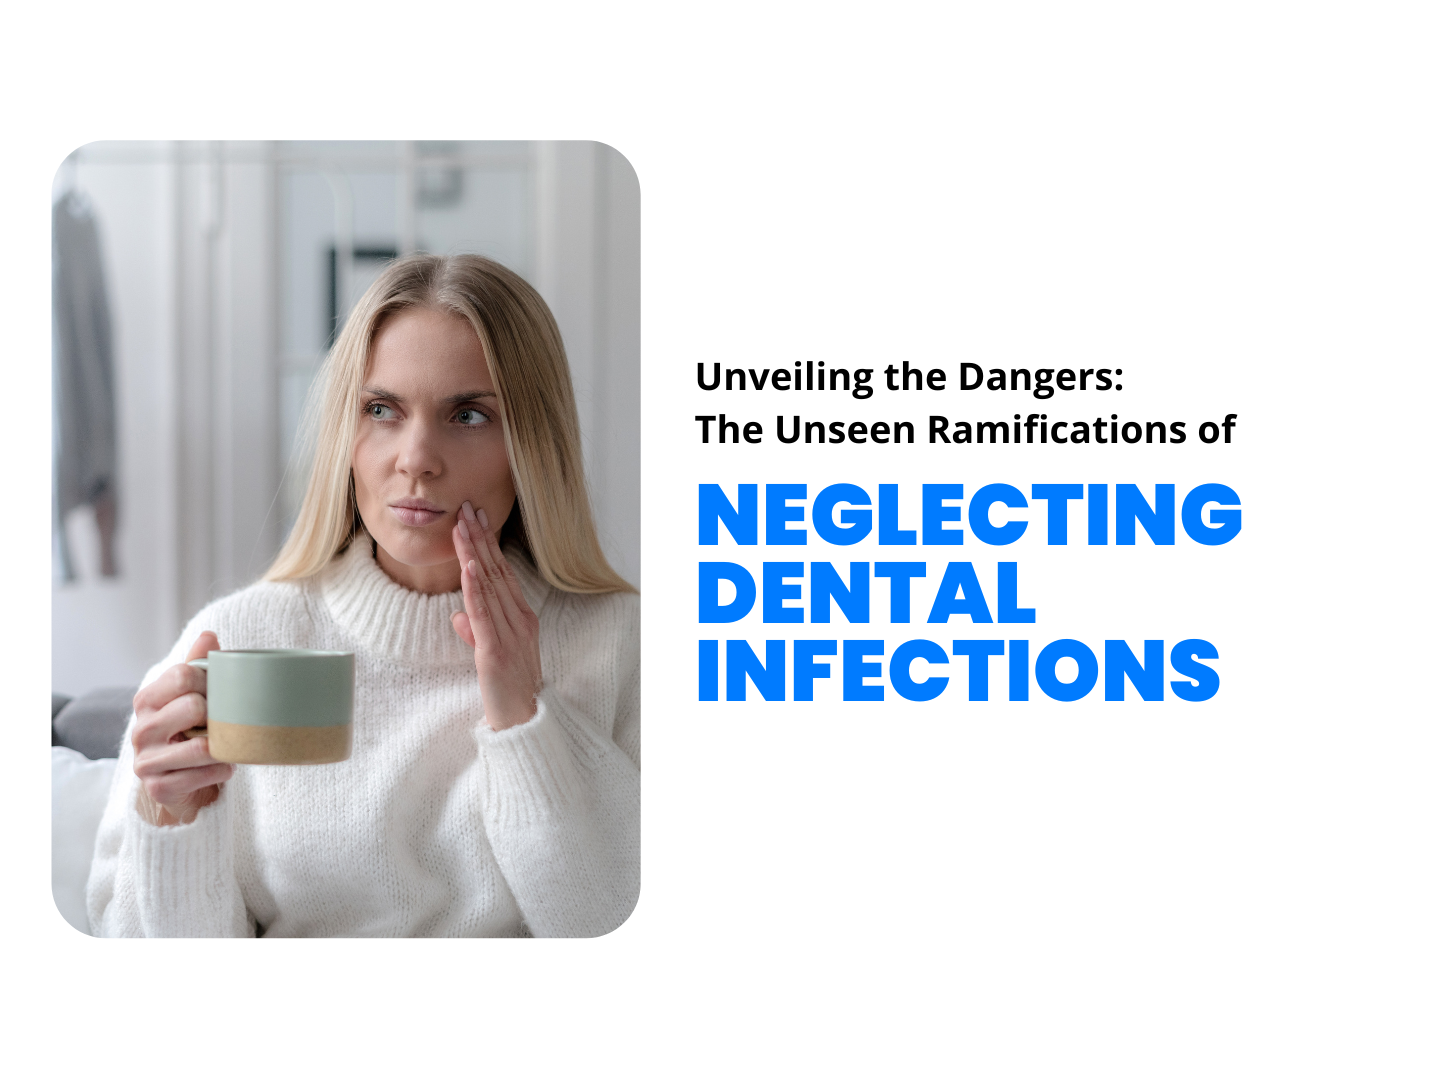 Unveiling the Dangers: The Unseen Ramifications of Neglecting Dental Infections